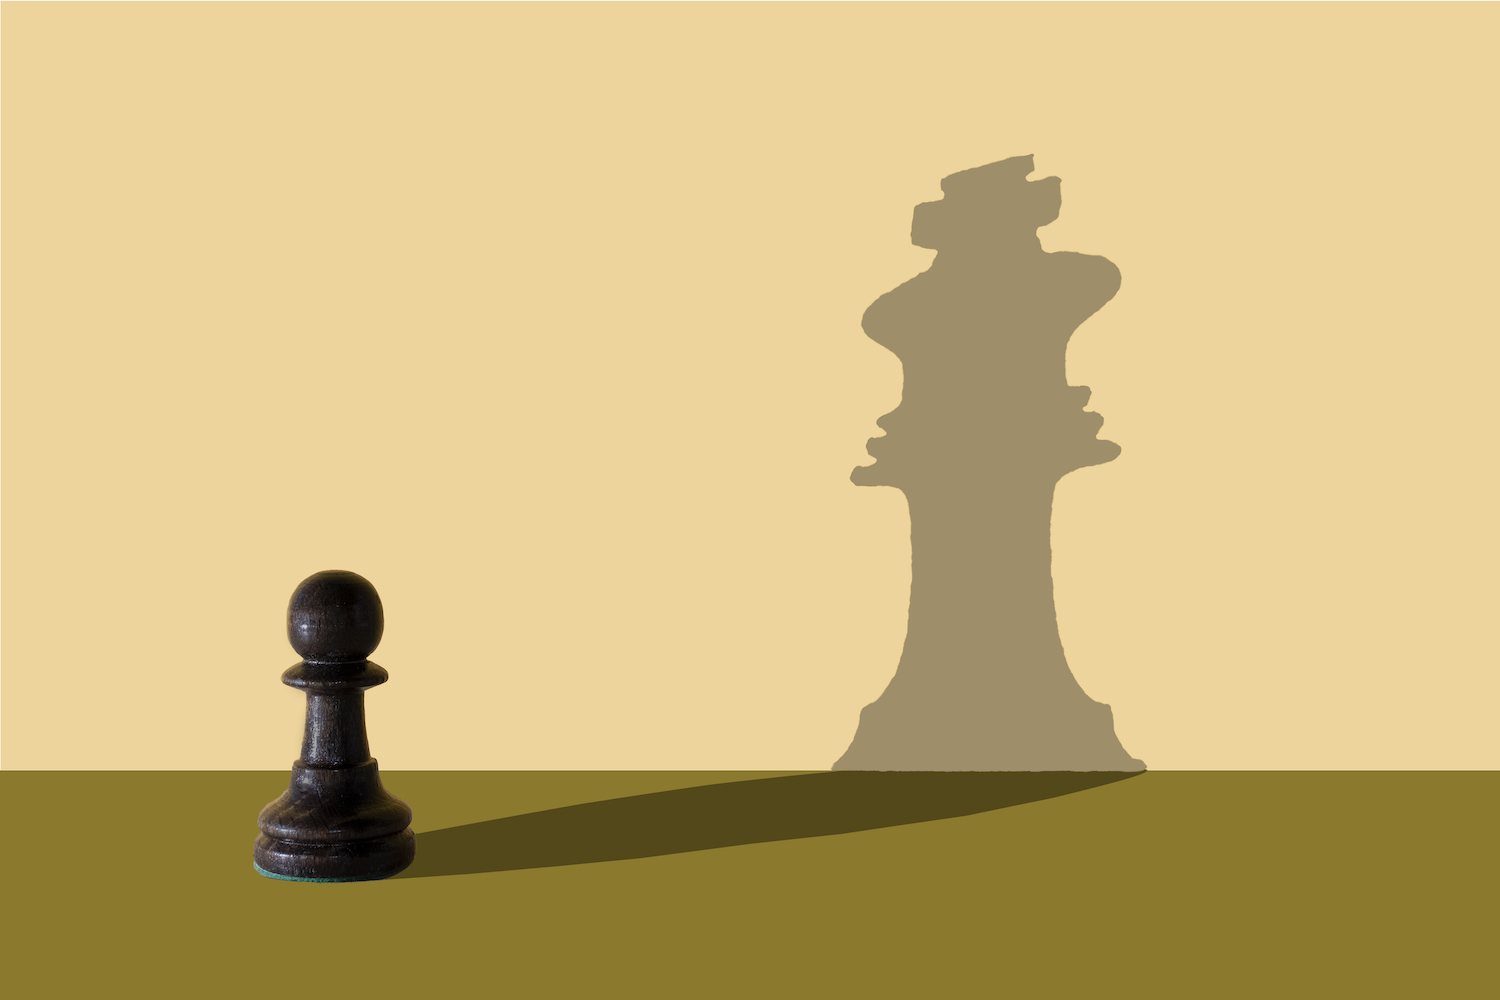 A chess figure casts the shadow of a different figure on an image midway through the photo and the illustration.